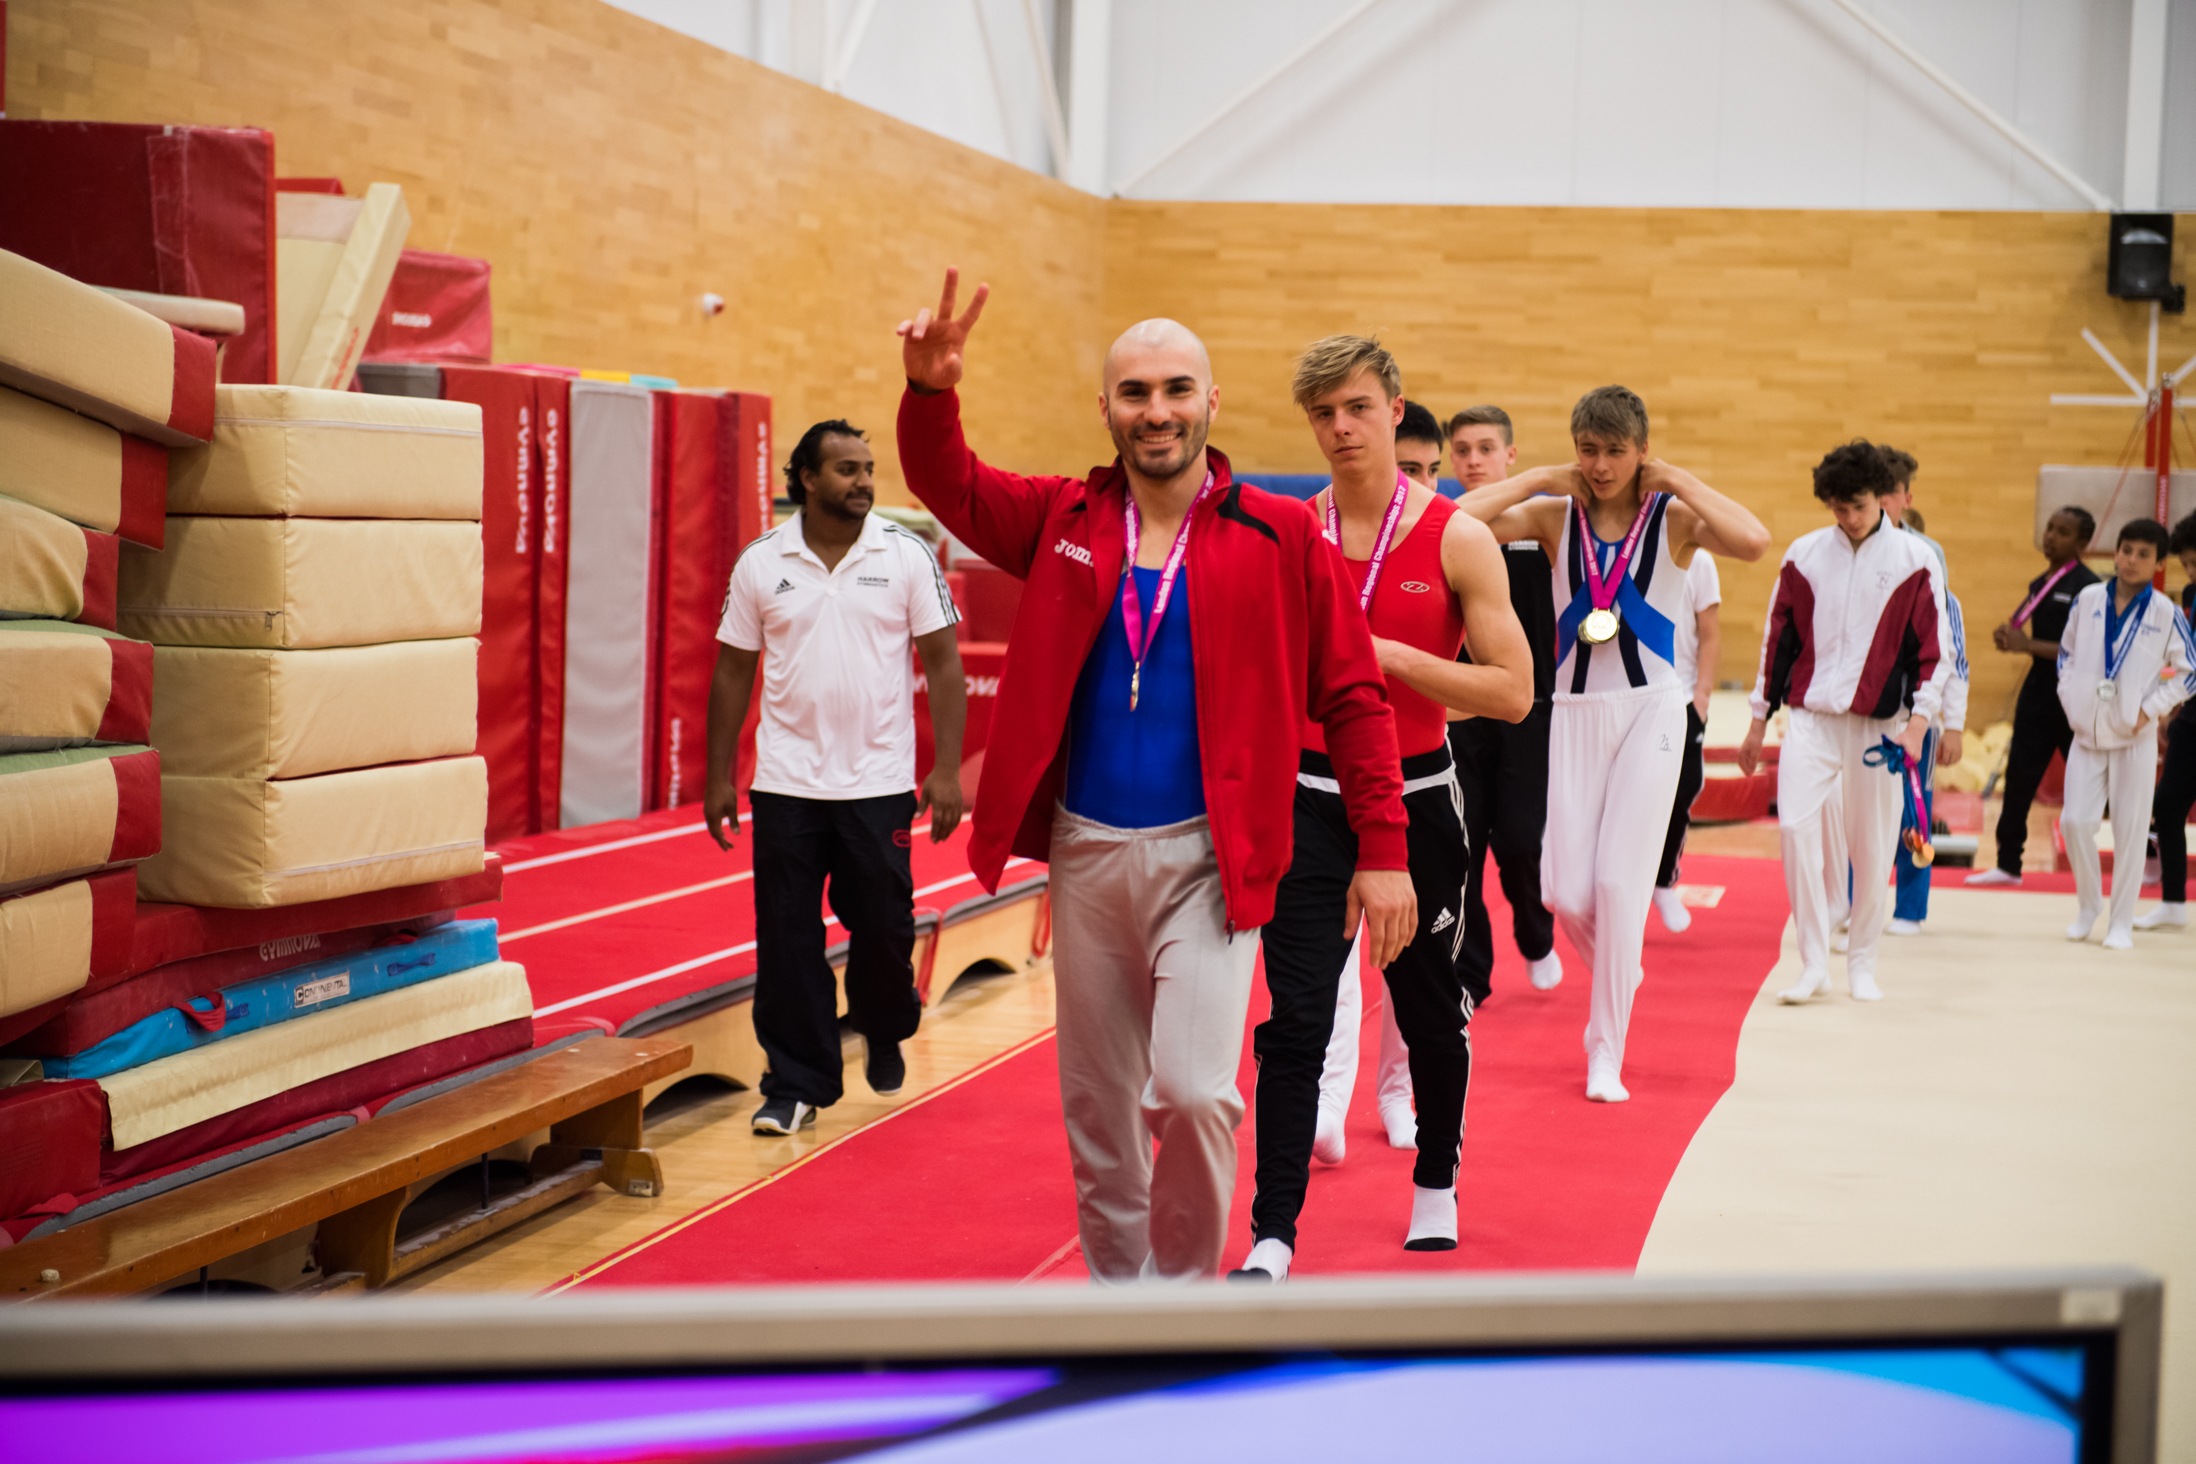 Stef from Elite Gymnastics Academy at the 2017 London Regional